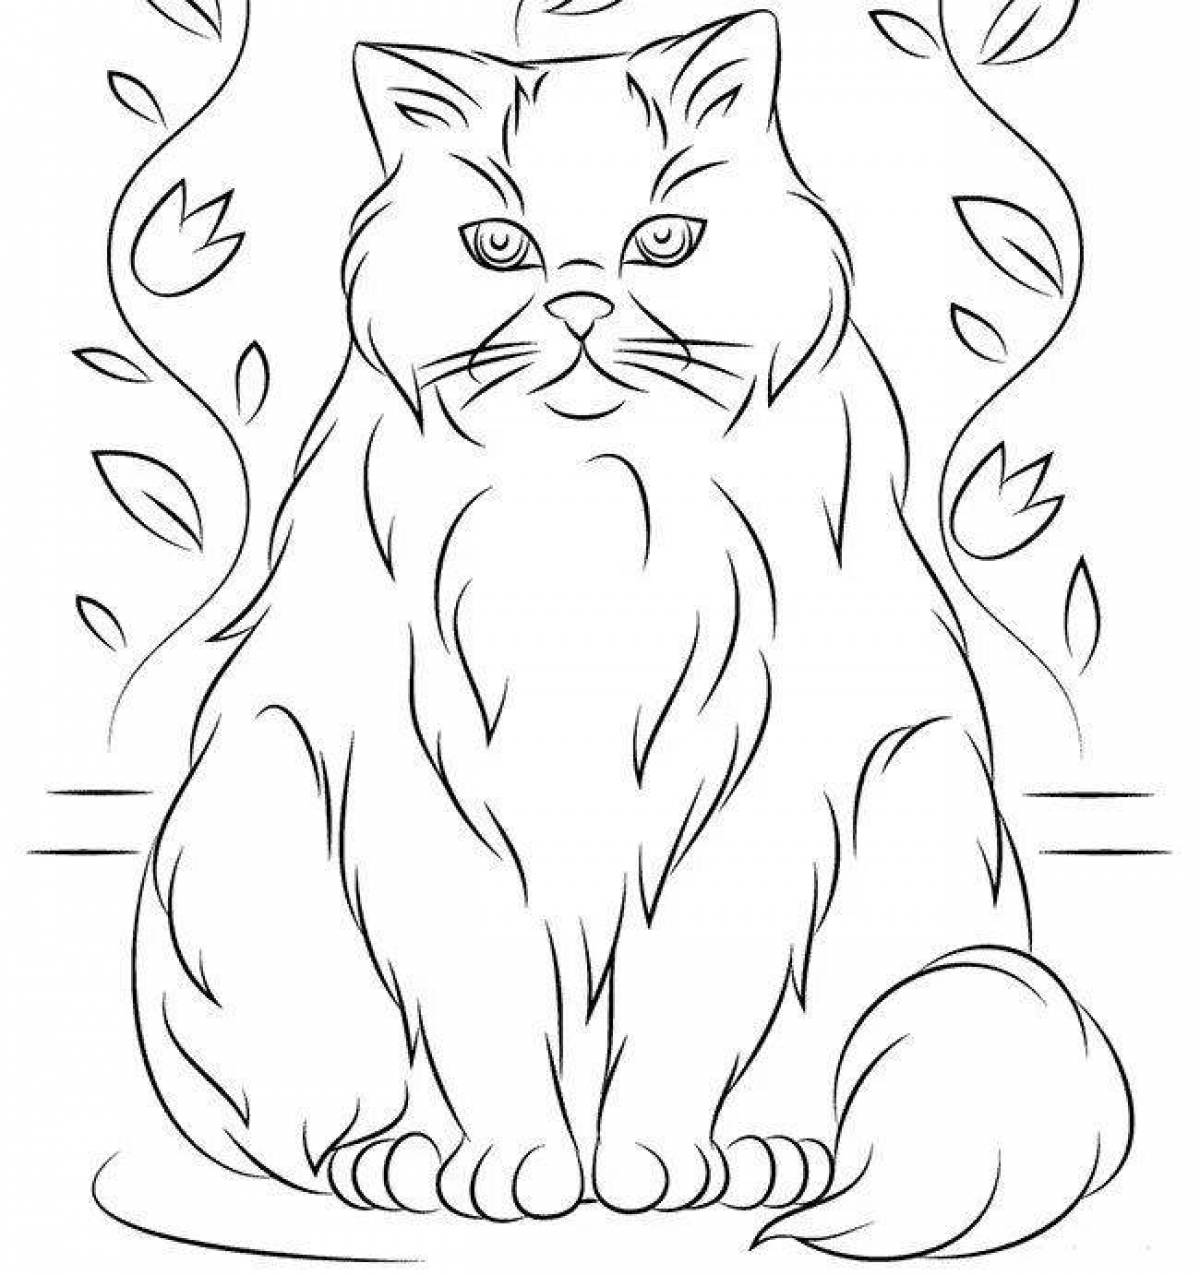 Coloring page affectionate siberian cat